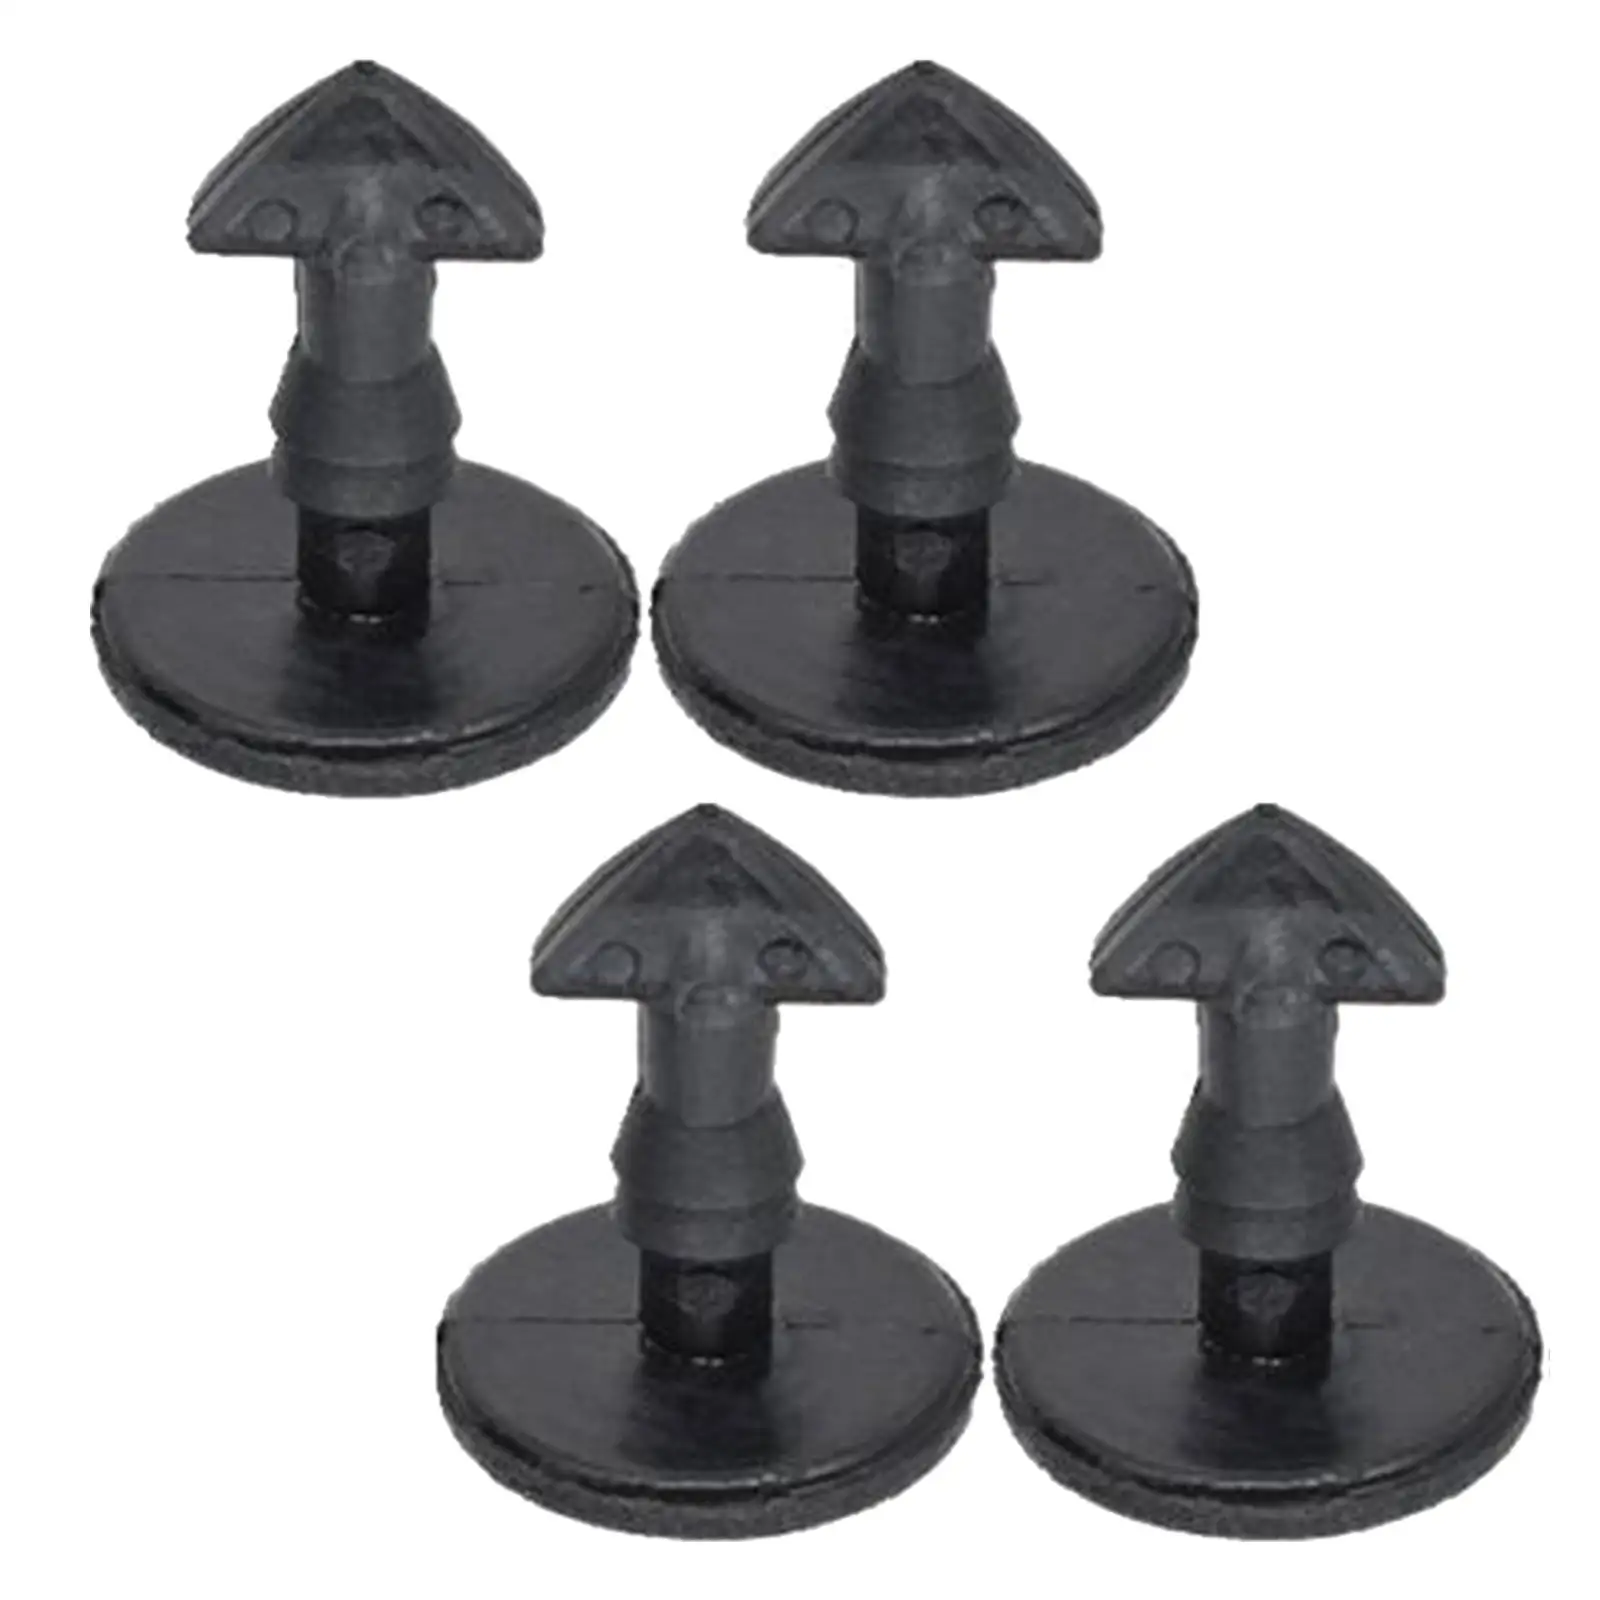 4Pcs Tow Eye Cover Clips Retainers Eye Dyr500010 for Discovery 3 2 Car Accessories Easy to Install